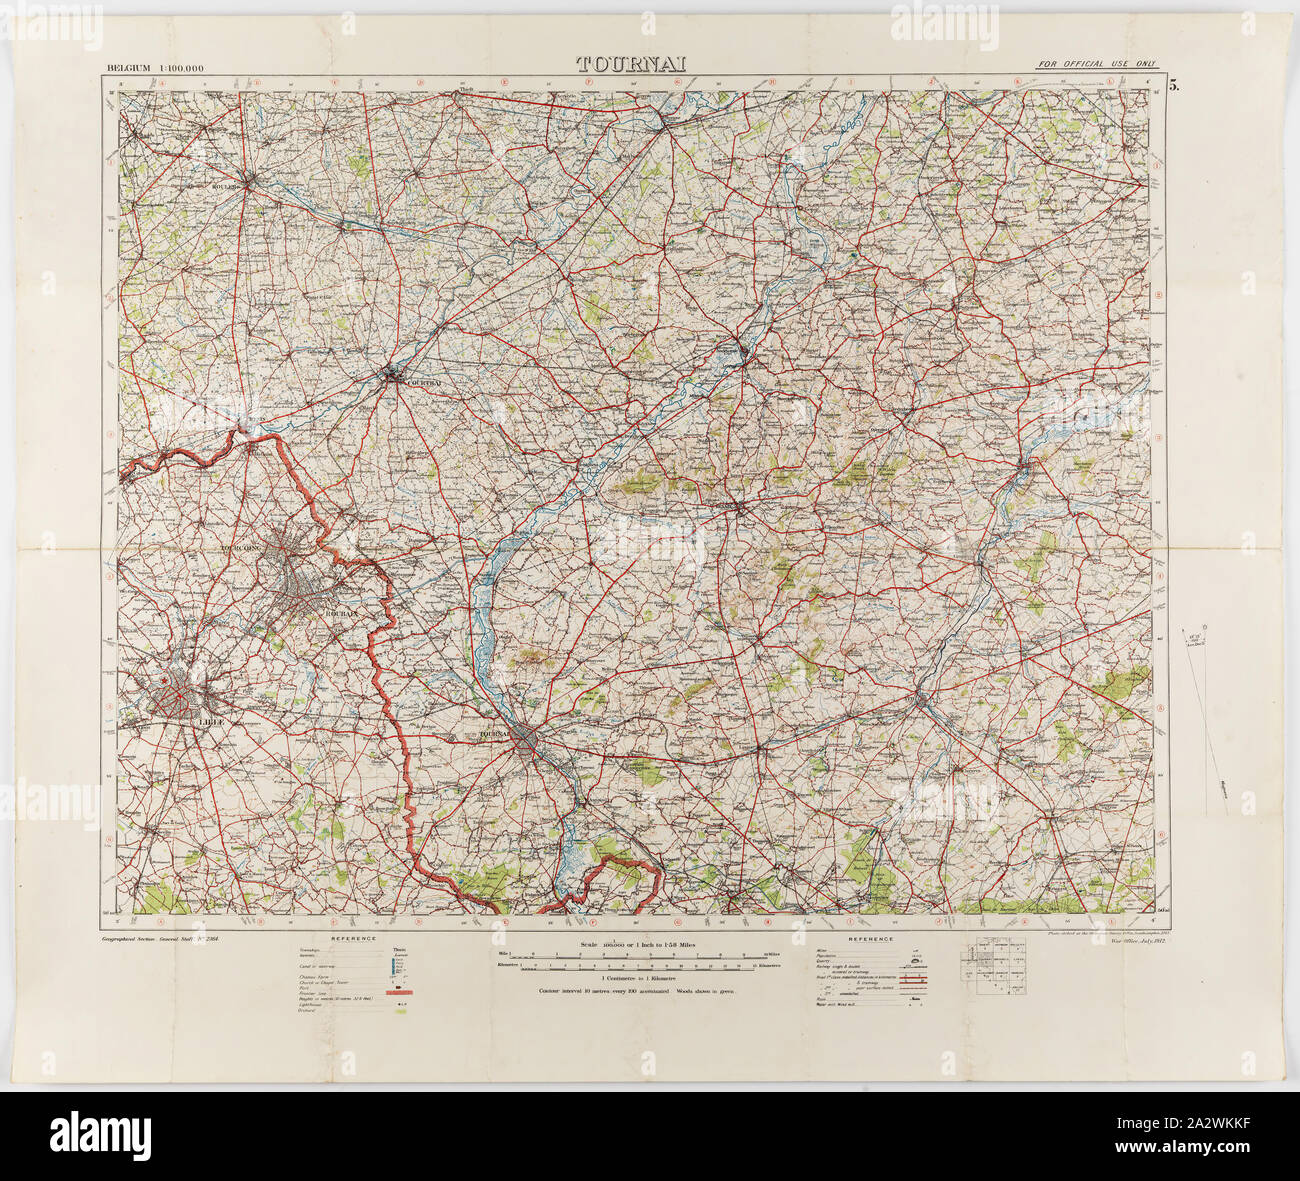 Map - Military, Belgium, Tournai 5, Scale 1:100,000, World War I, Jul 1912, Map of Belgium - Sheet Tournai, 5, scale 1:100,000. The map was photo-etched at the Ordnance Survey Office, Southampton, in 1912, and was published by the War Office, July 1912. The map is labelled Geographical Section, General Staff, No. 2364. It would have been in use during World War I. Part of the collection of World War I memorabilia donated by Sergeant John Lord (#6252). John Lord was 19 Stock Photo